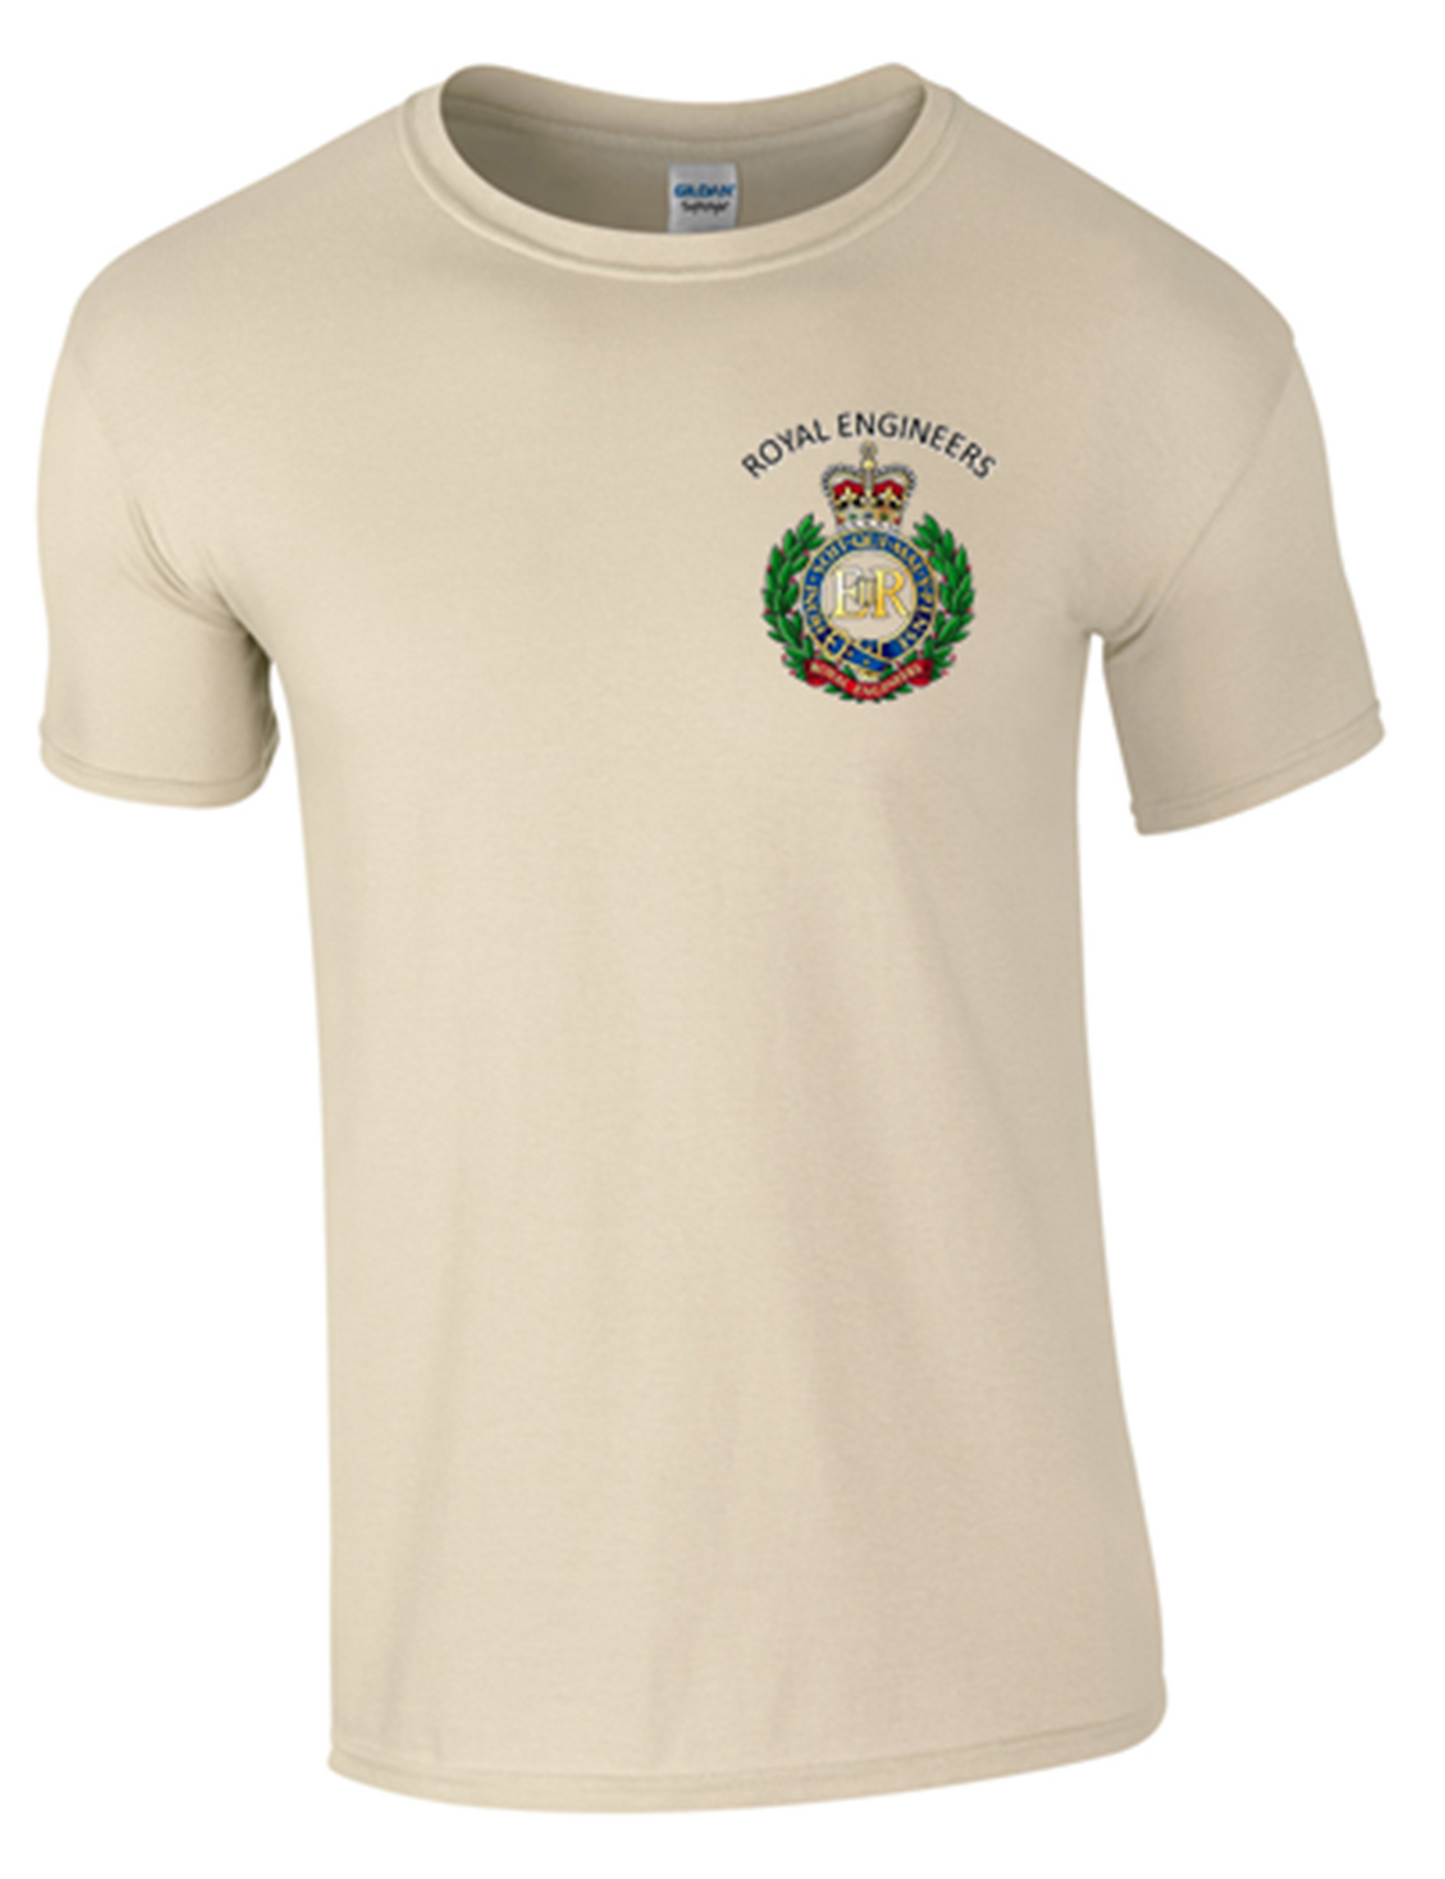 Royal Engineers T-Shirt Front Logo only Official MOD Approved Merchandise - Army 1157 kit Sand / 3XL Army 1157 Kit Veterans Owned Business